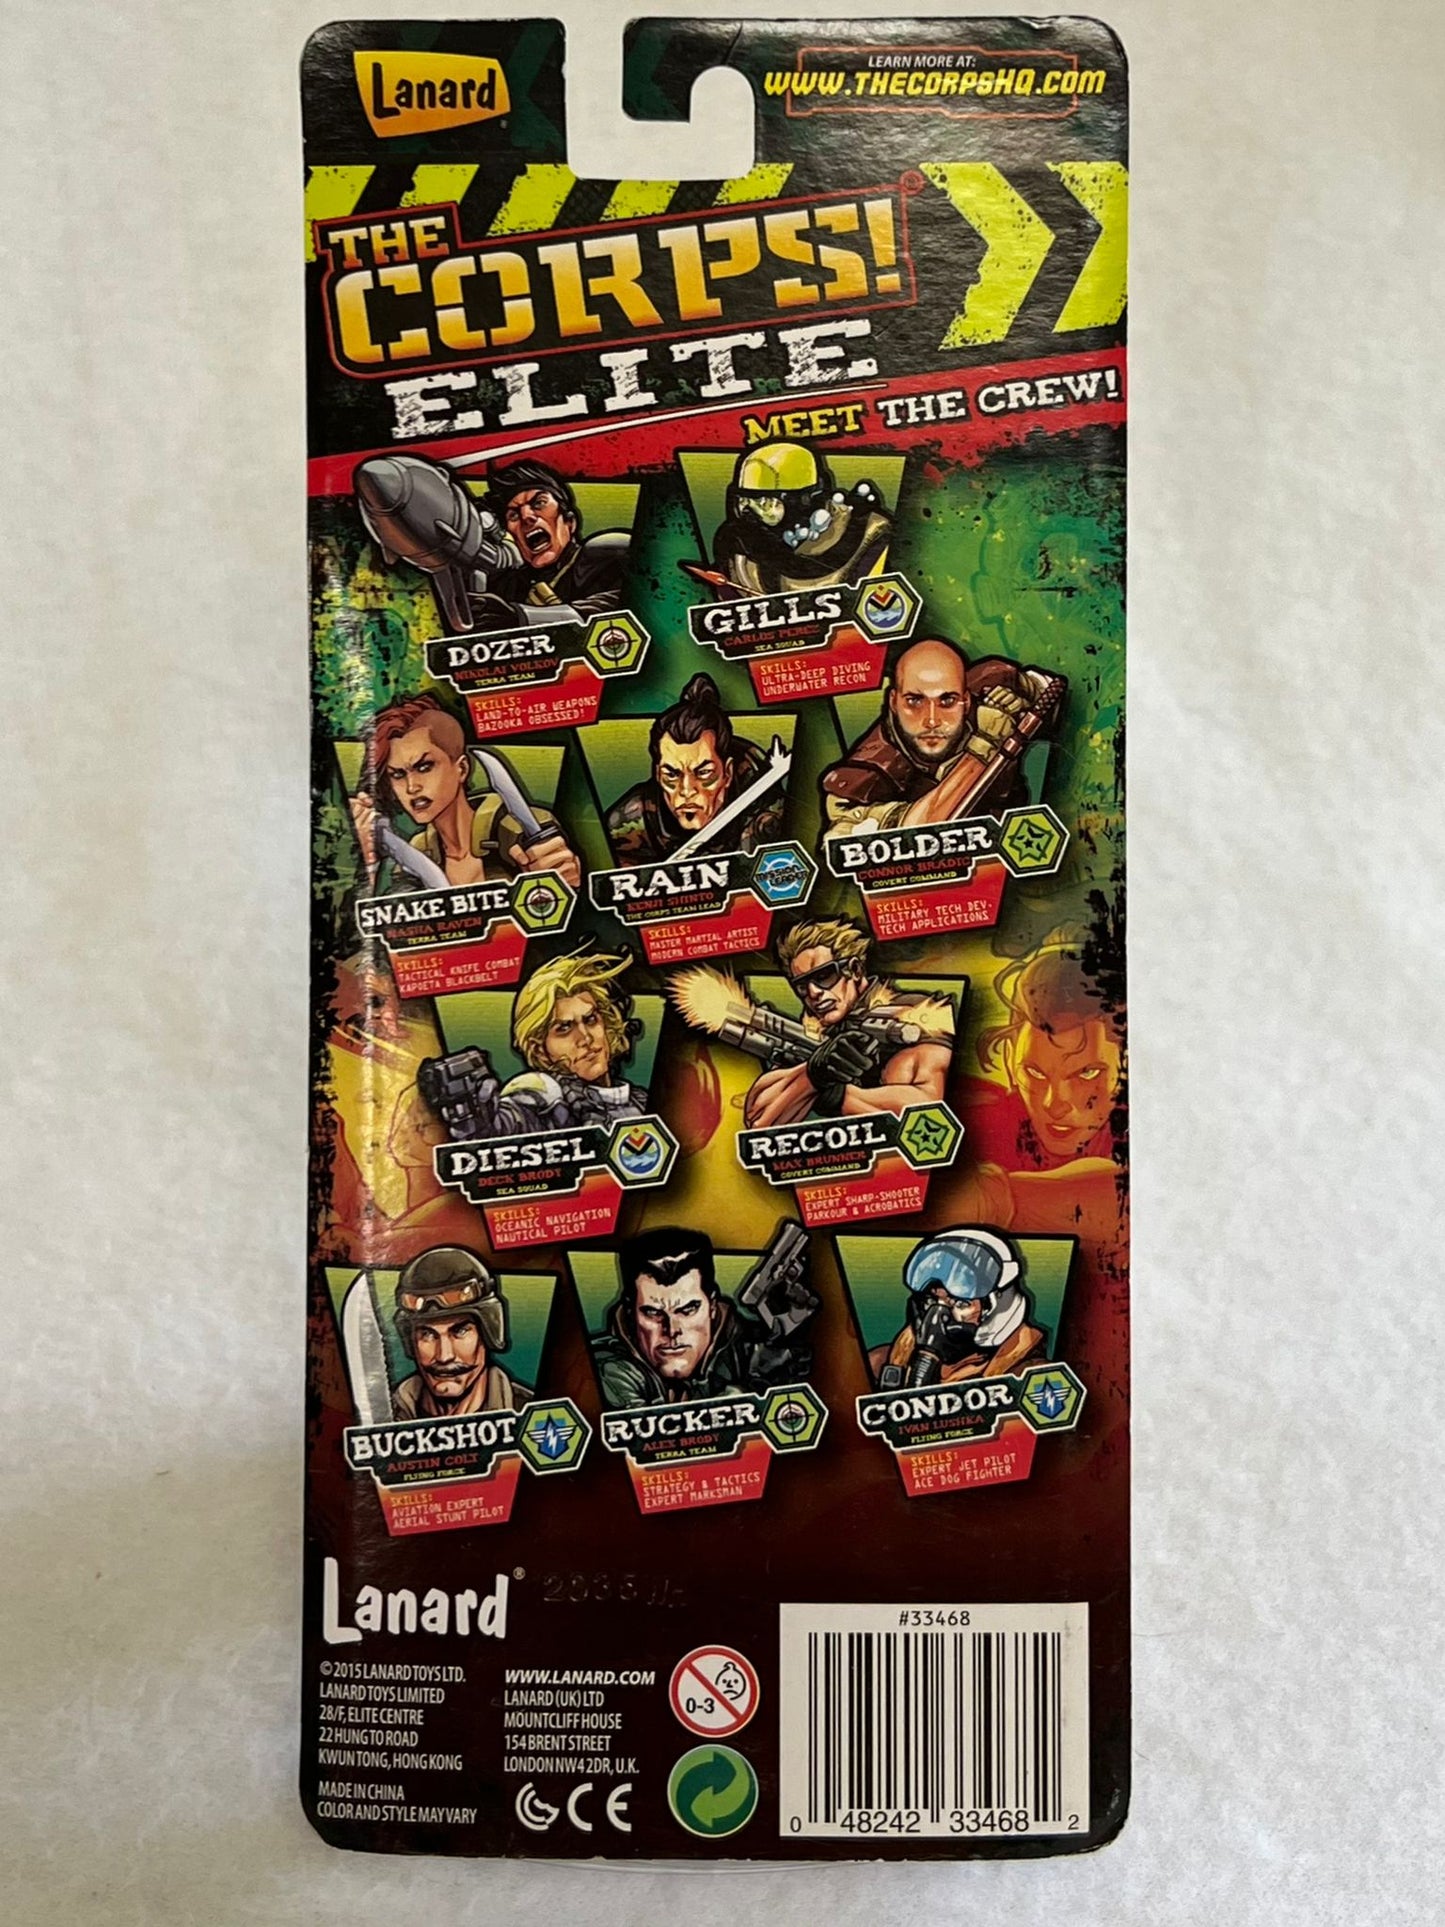 NEW *The Corps Elite (Battle Gear & 3 Members of the Corps)